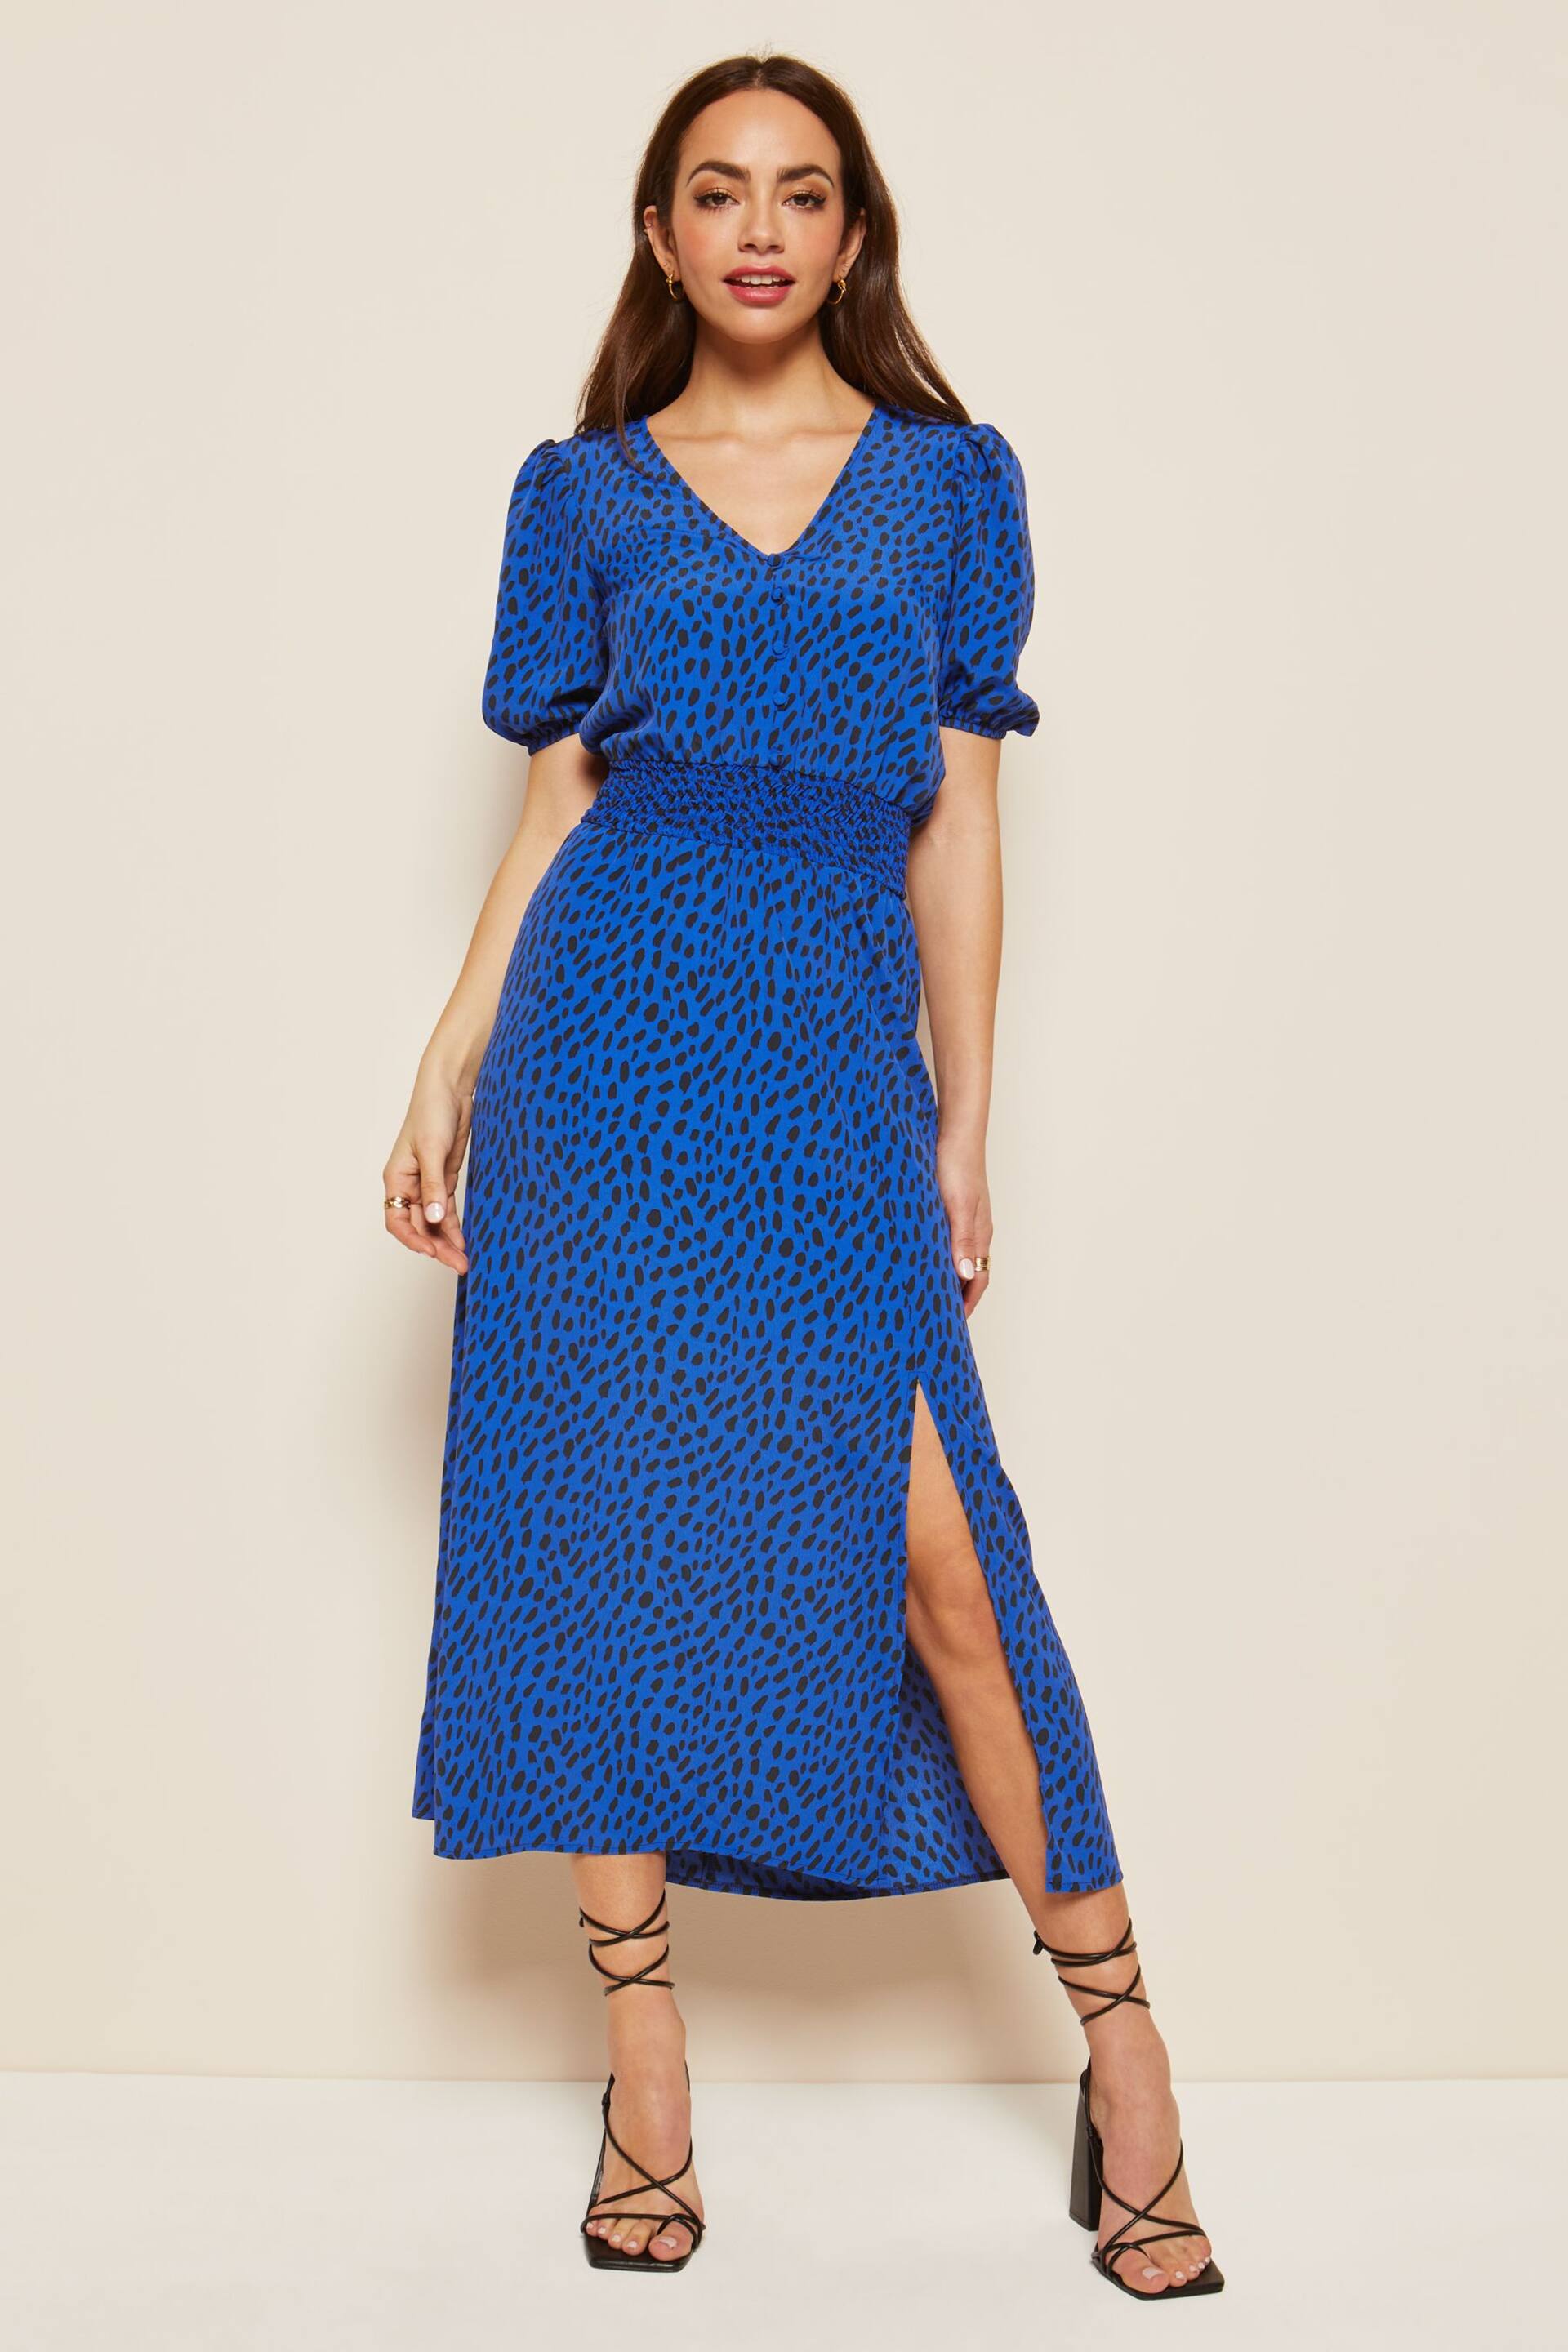 Friends Like These Cobalt Blue Puff Sleeve Ruched Waist V Neck Midi Summer Dress - Image 1 of 4